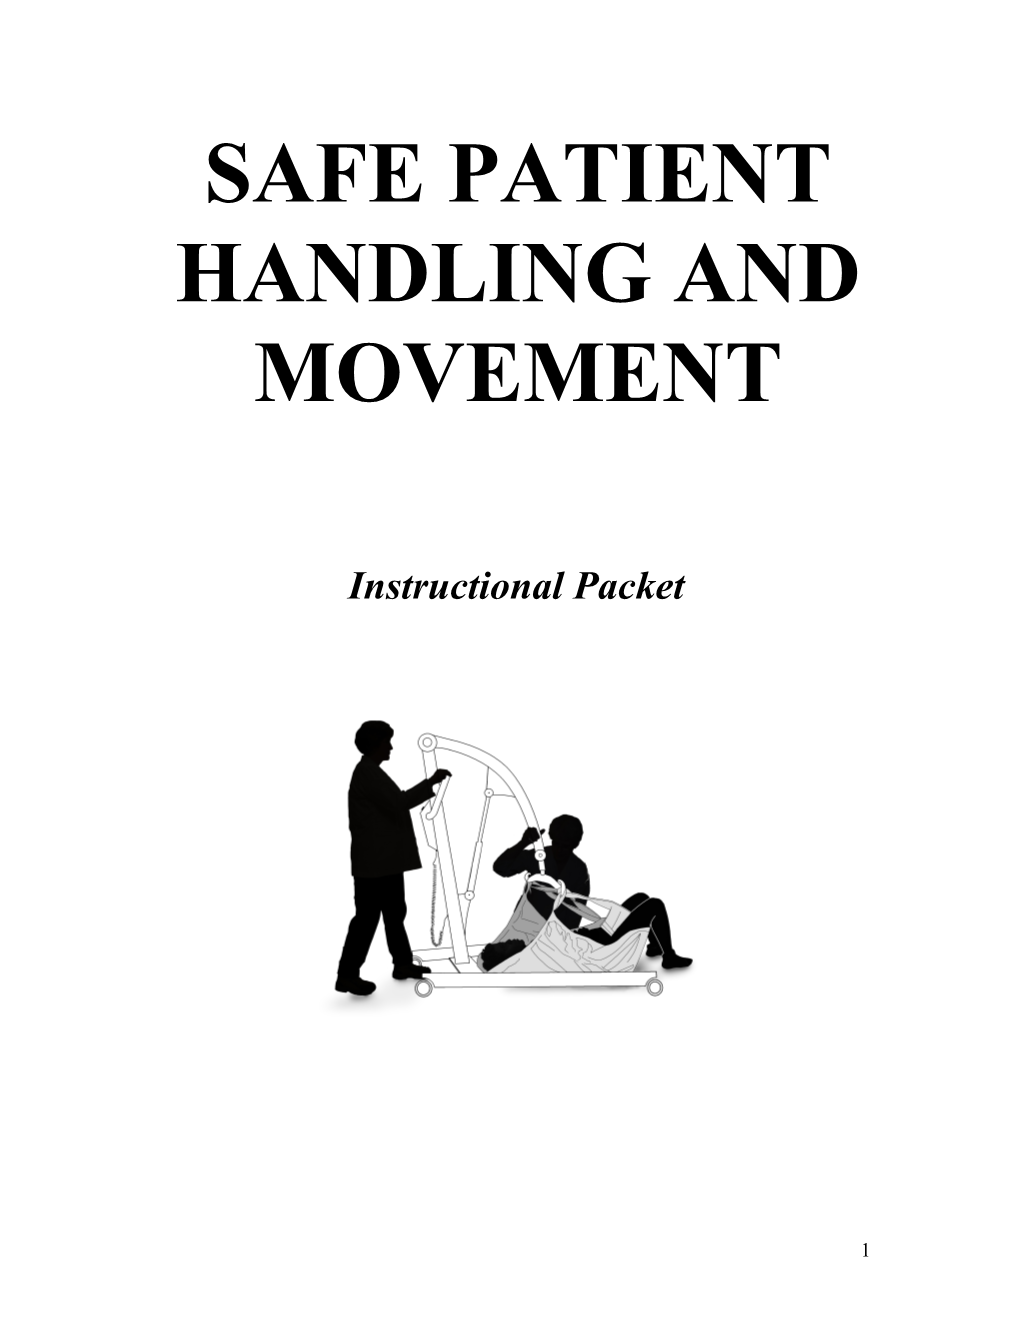 Principles Of Safe Patient Handling And Movement